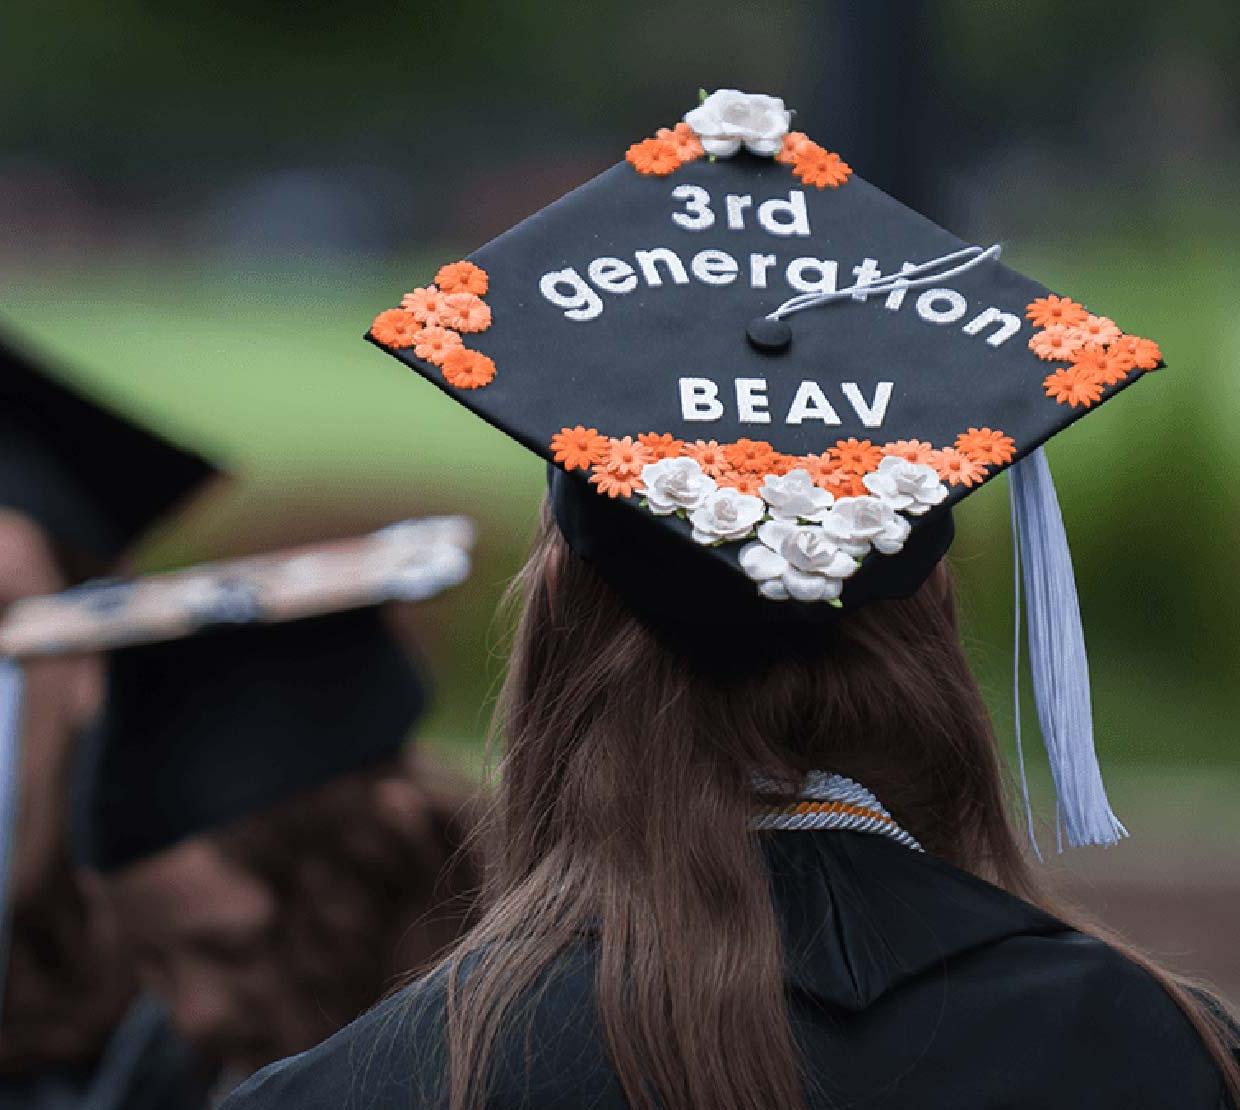 decorated graduation cap with "3rd Generation Beav" collaged on